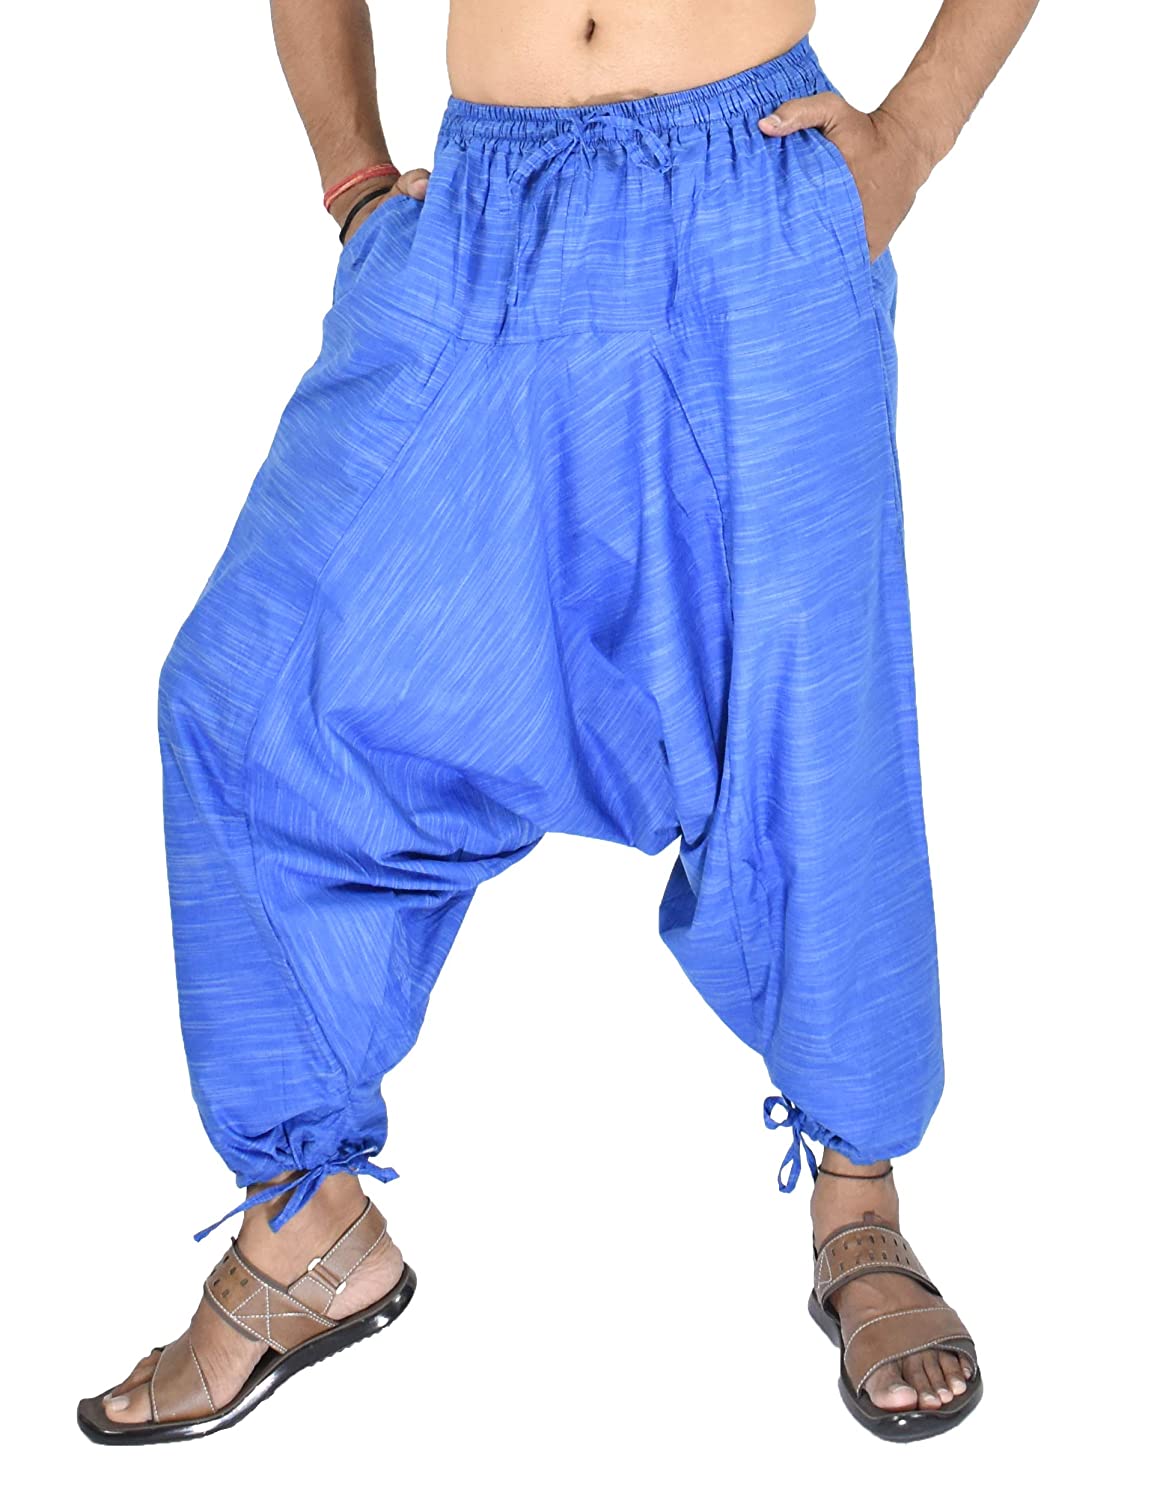 Blue And Green Silk Ethnic Motifs Top With Harem Pants